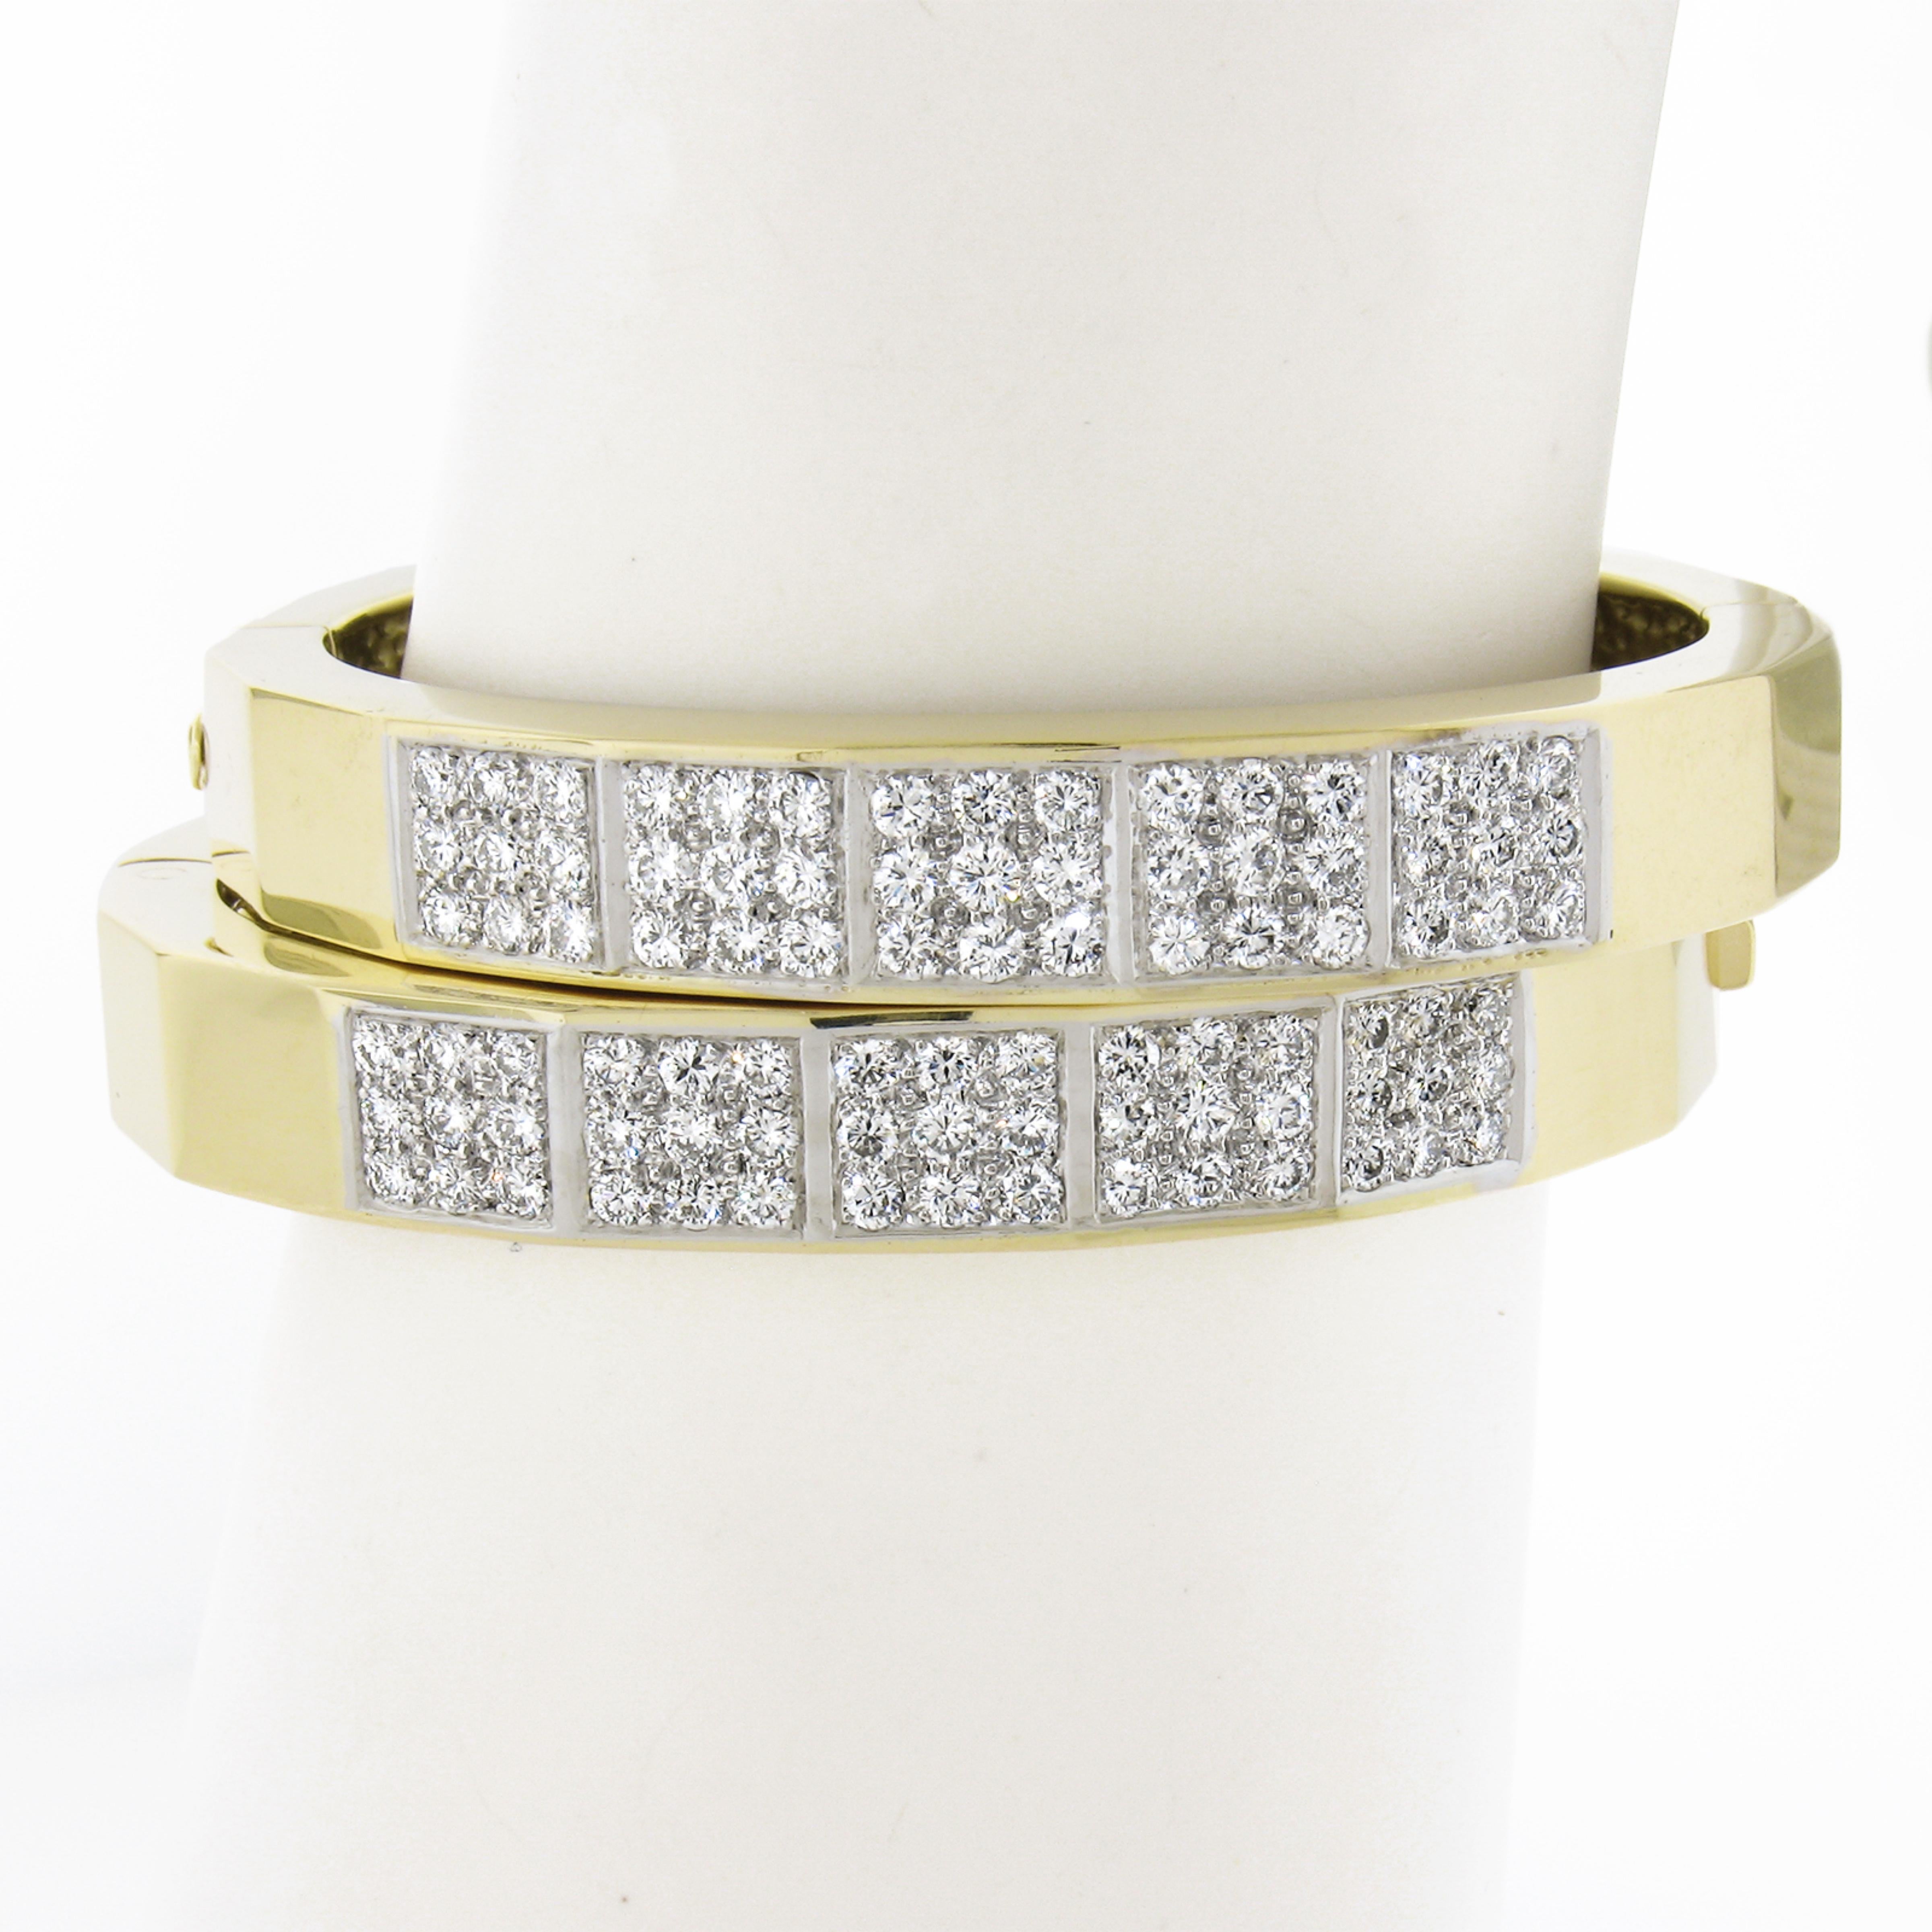 --Stone(s):--
(90) Natural Genuine Diamonds- Round Brilliant Cut - Pave Set - G/H Color - VS1/VS2 Clarity - 4.50-5ctw (approx. for the pair)

Material: Solid 18k Yellow Gold w/ White Gold Top
Weight: 90.18 Grams (weight for pair)
Size: Will